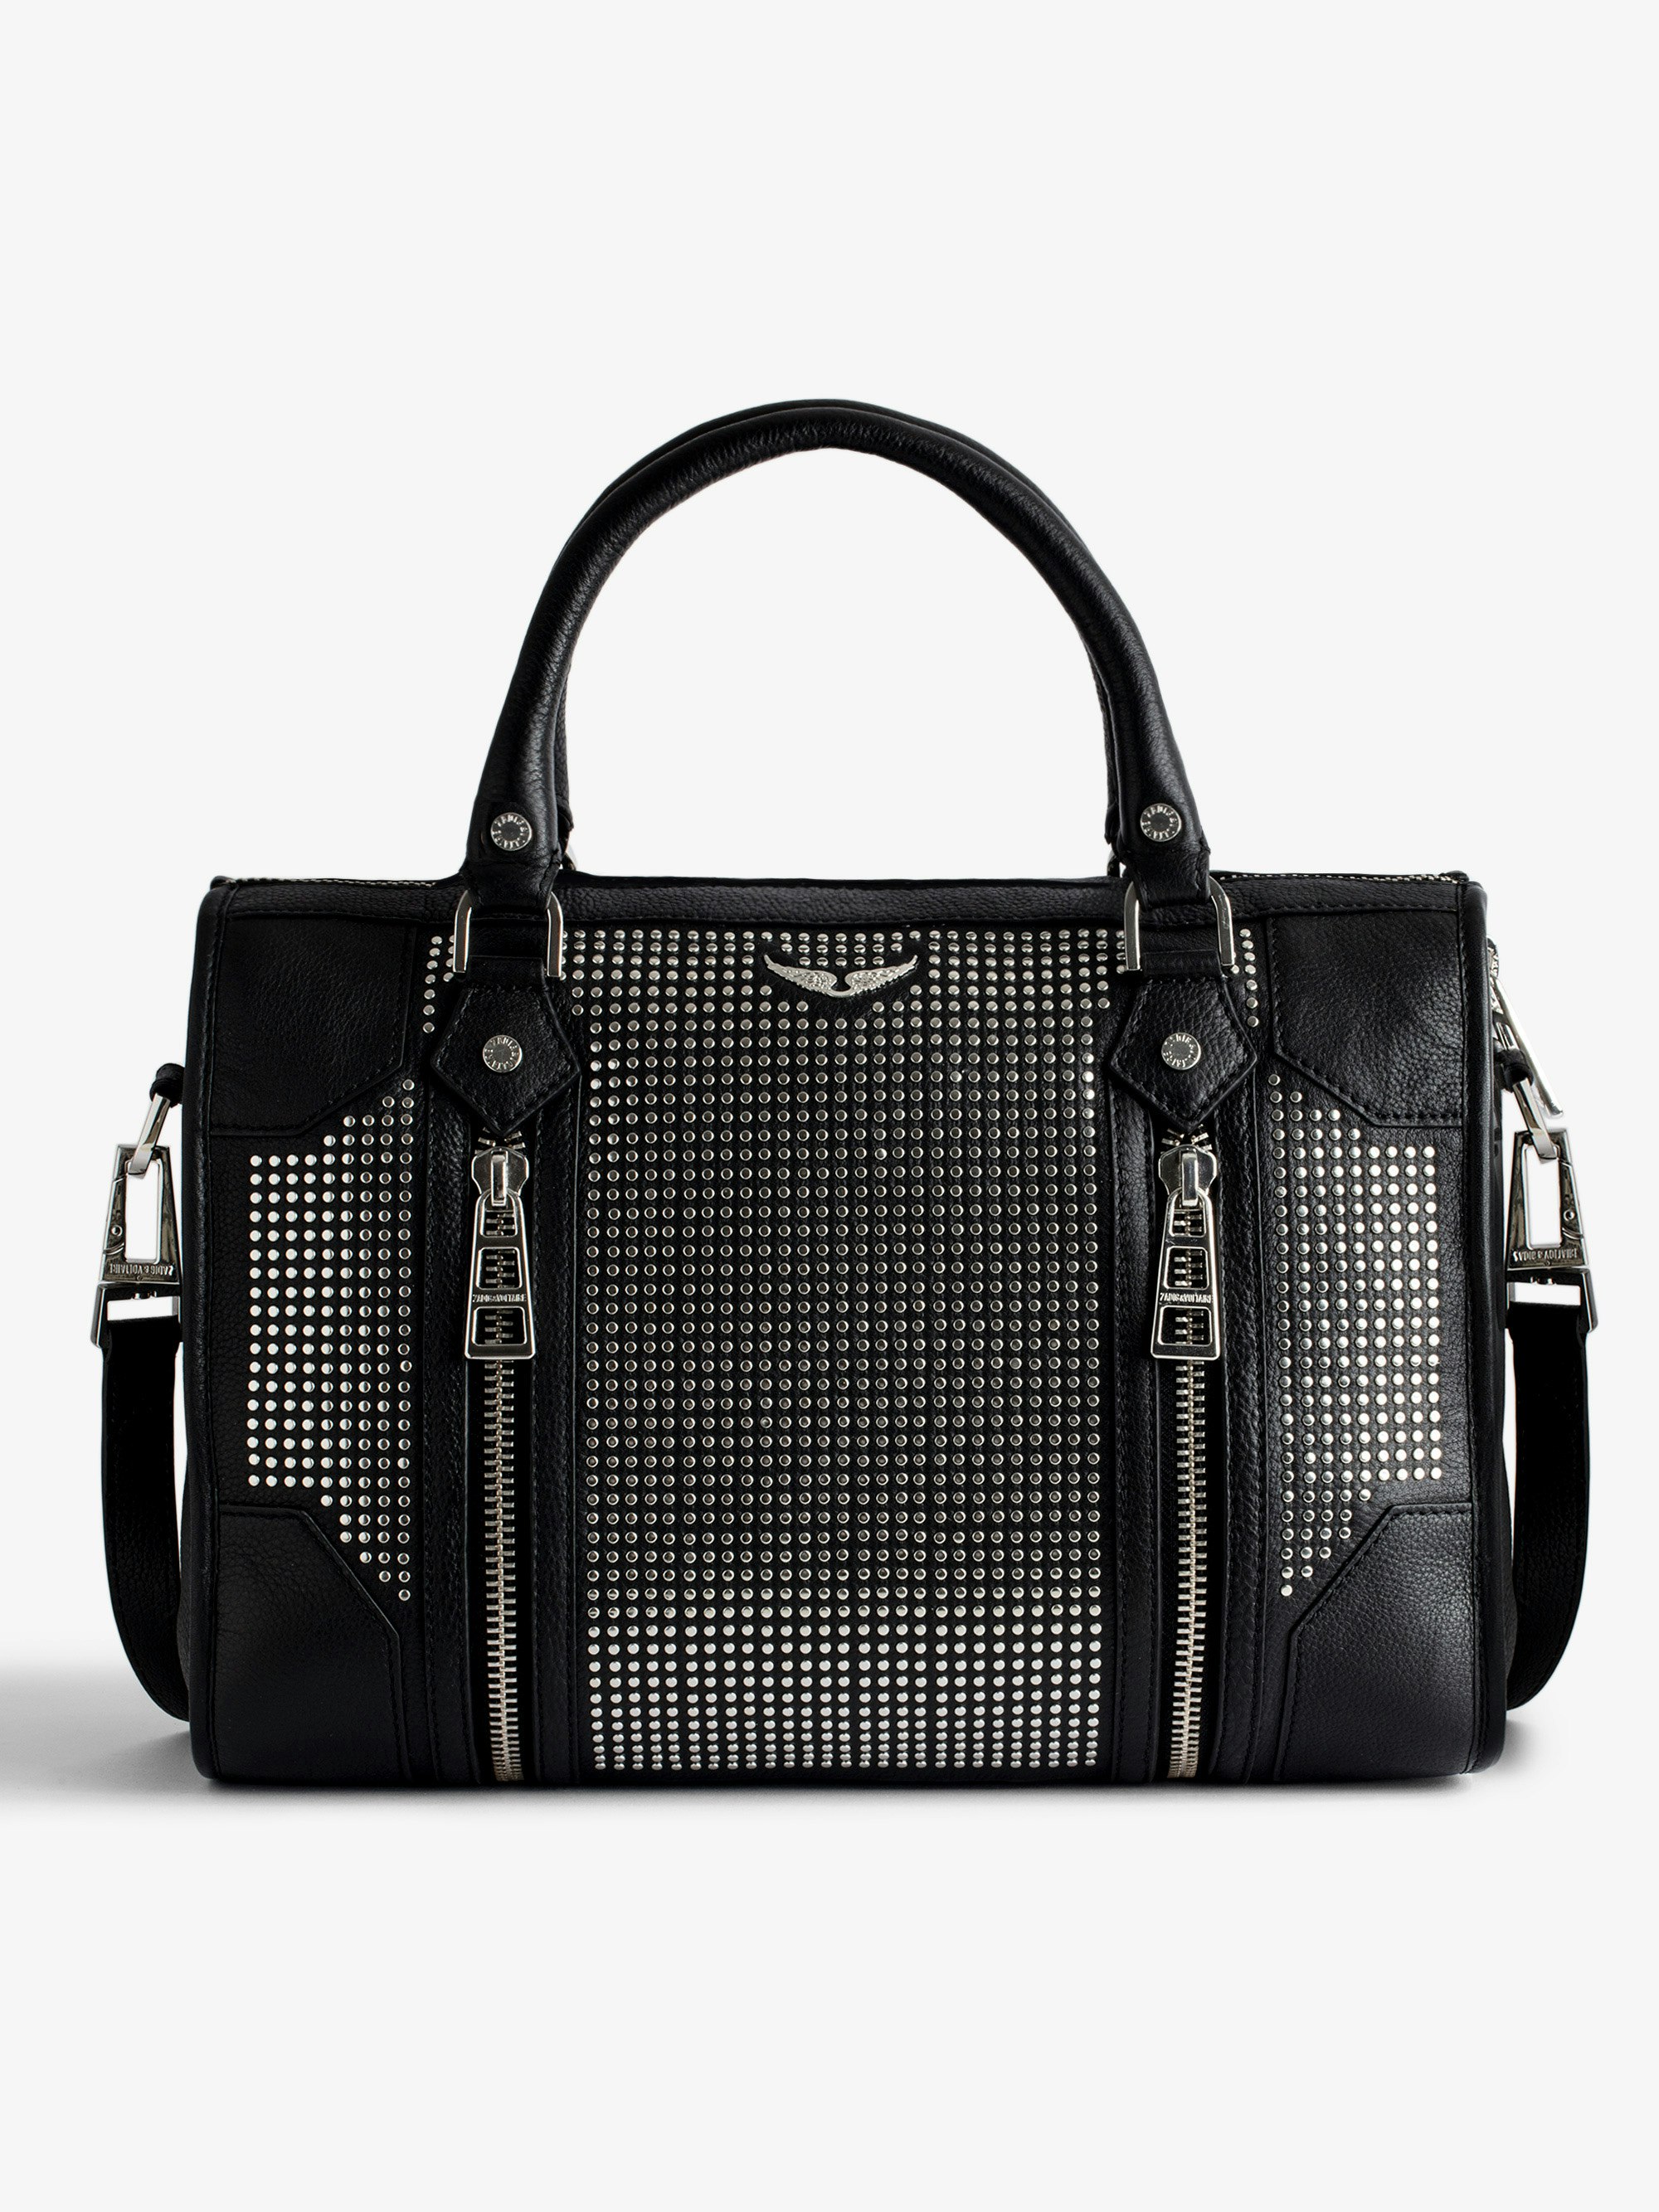 Sunny Medium #2 Bag - Women’s black leather medium zipped bag with studs and a shoulder strap.